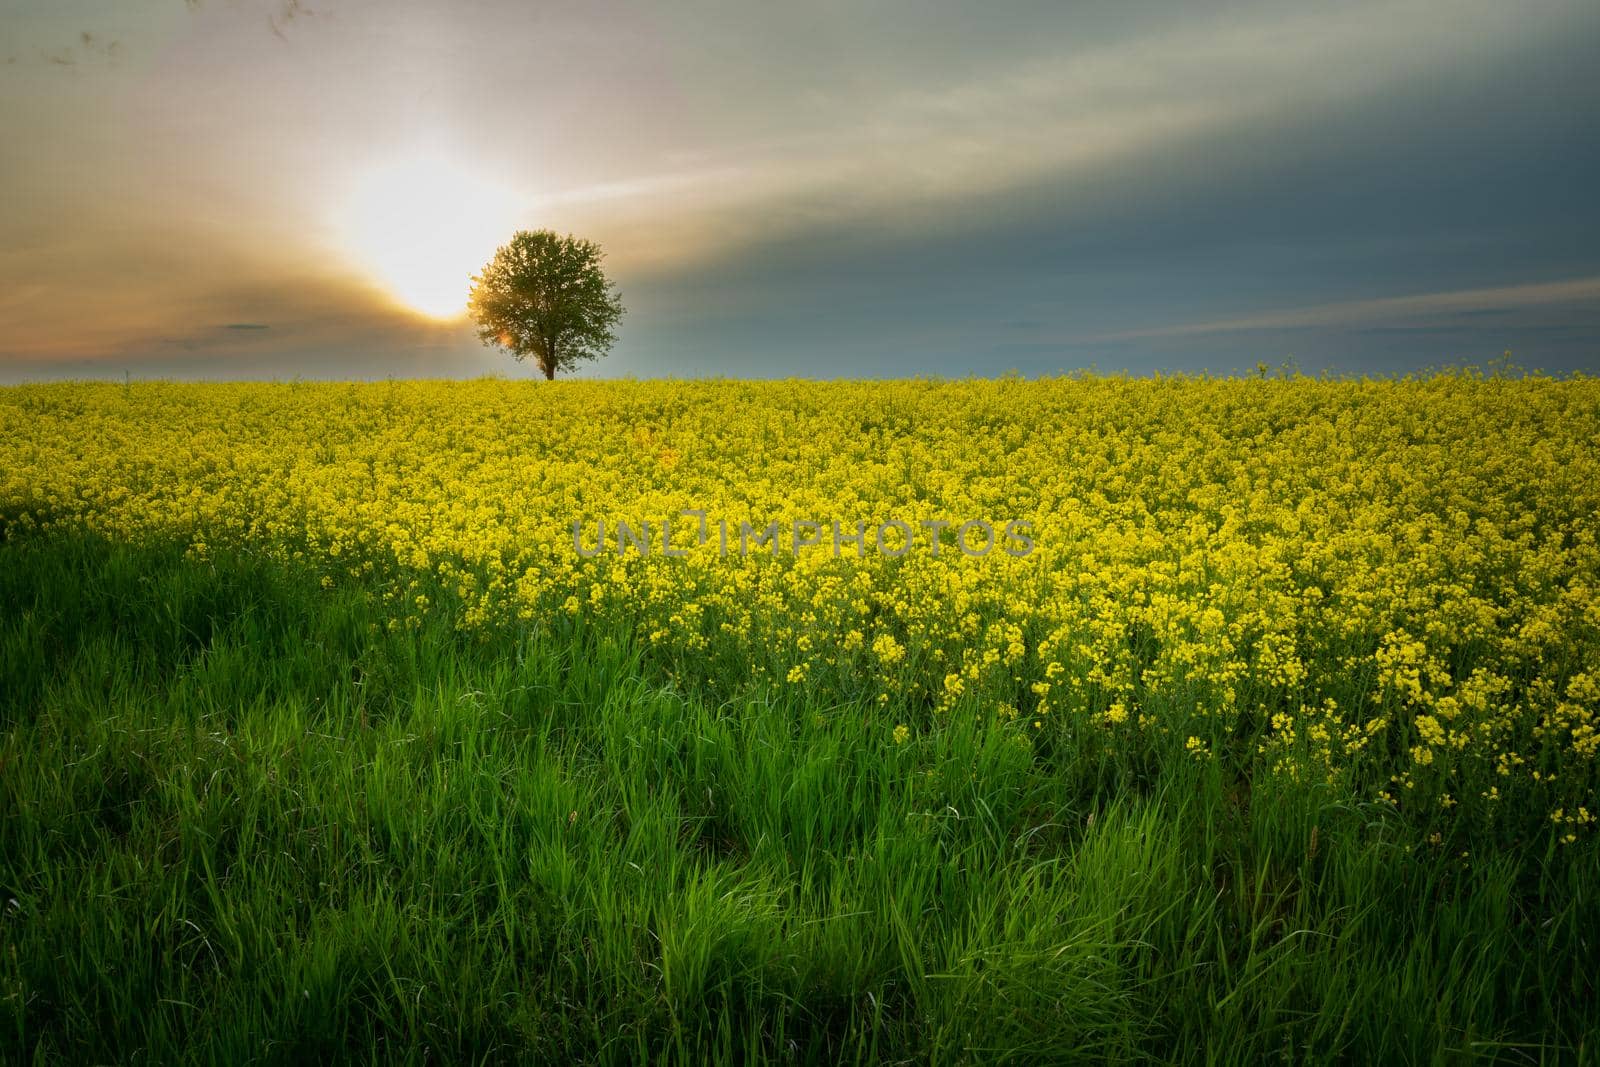 Sunset and a lonely tree growing in a rape field by darekb22